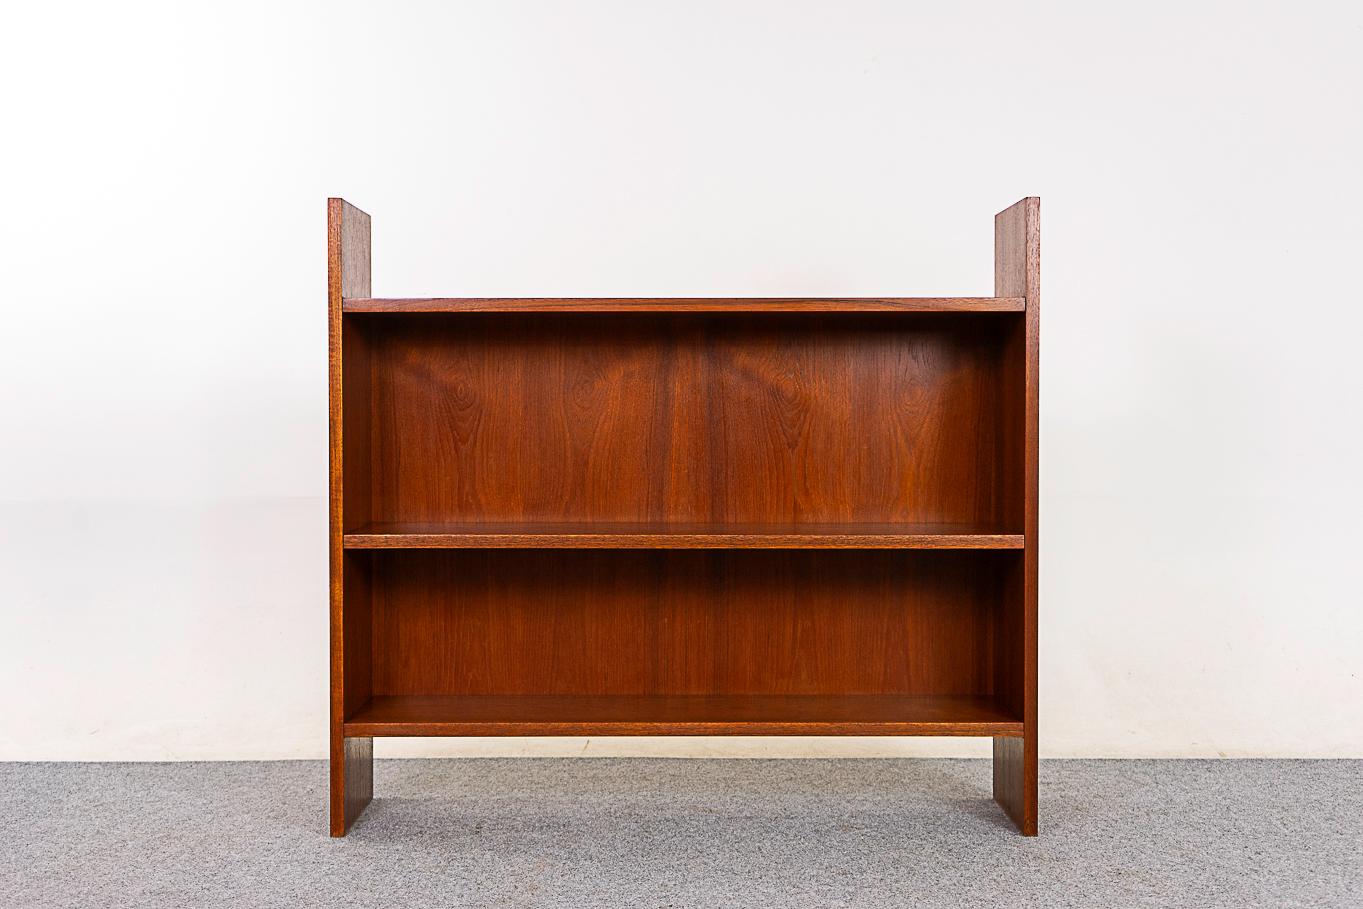 Teak mid-century bookcase, circa 1960s. Low profile design with adjustable shelf, can be hung at 7 different heights. A perfect condo sized storage solution.

*6 available, construct a library wall!

Please inquire for international shipping rates.